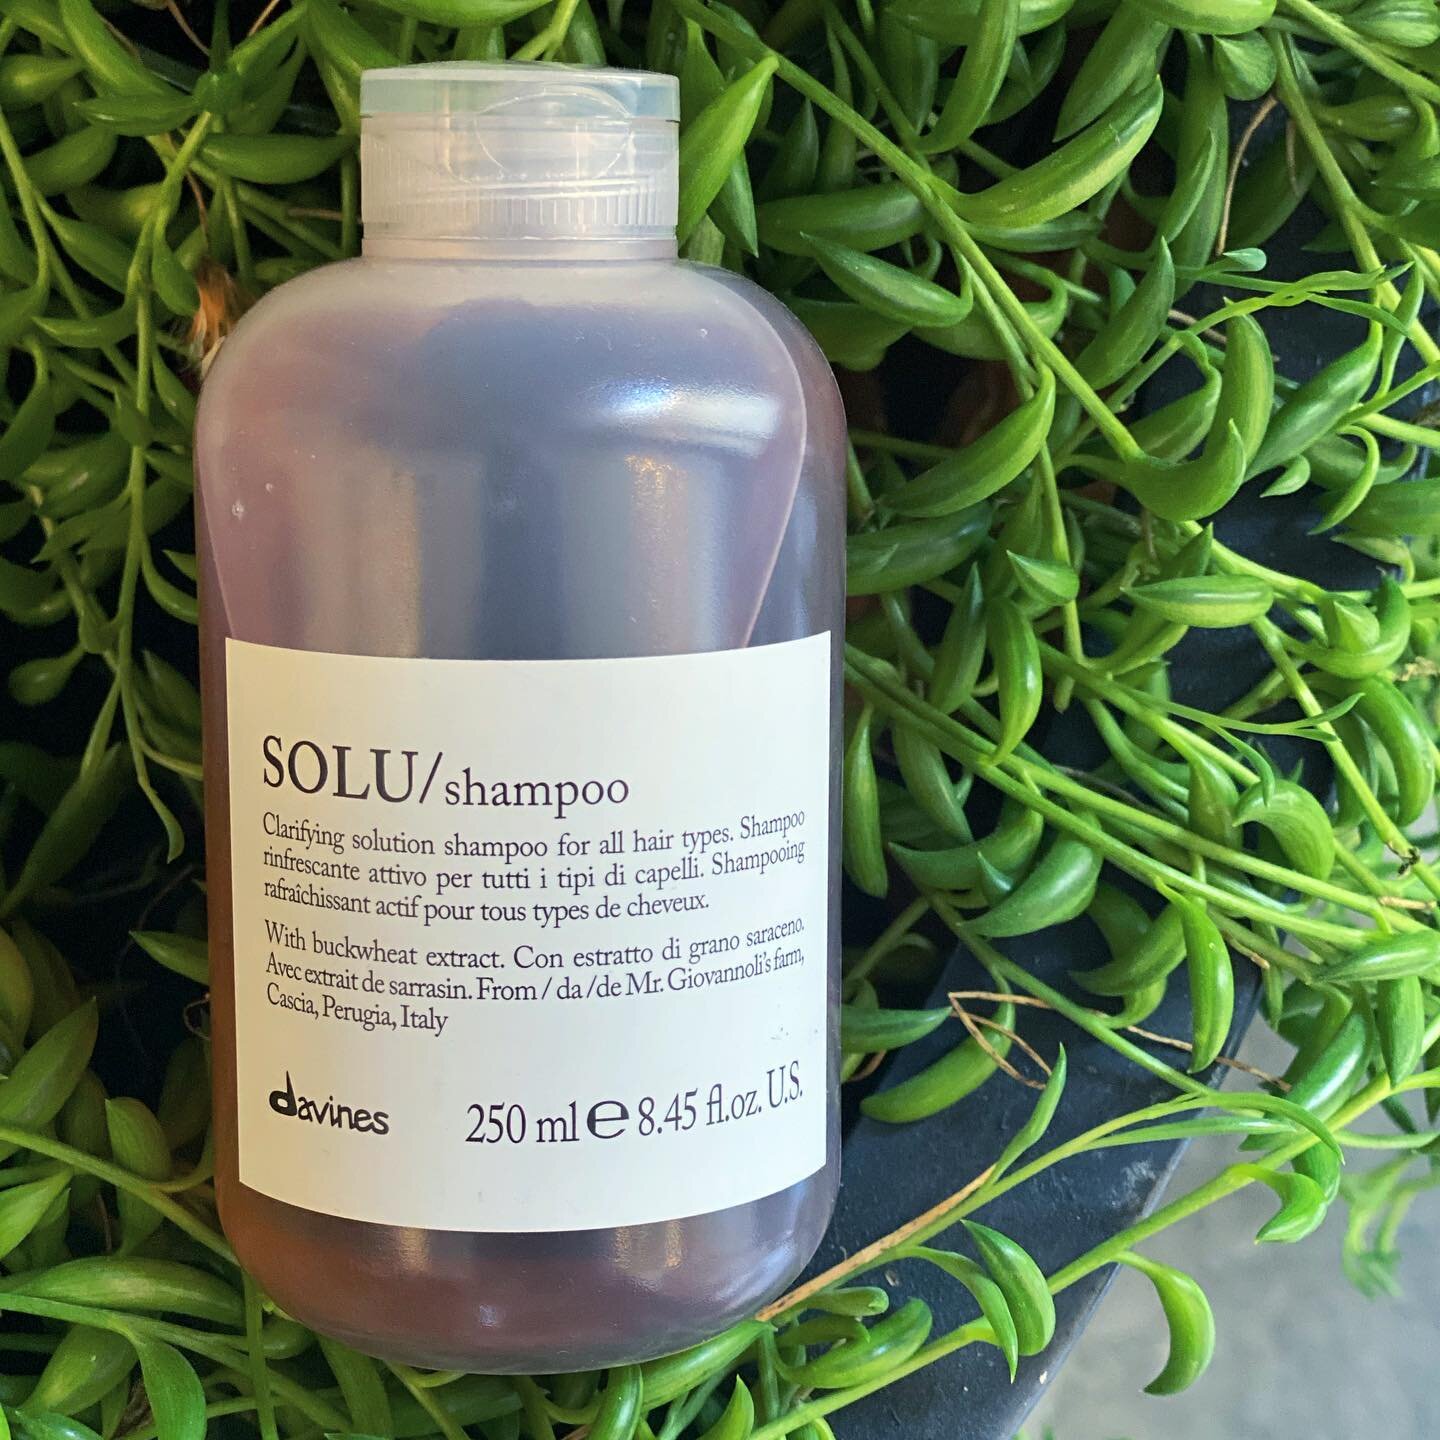 Is your hair feeling weighed down and gritty with product buildup/chlorine? Davines SOLU shampoo is the ticket for clean, light and airy hair!  A clarifying product that is gentle enough to use daily, leaving the hair soft and shiny&hellip;.AND made 